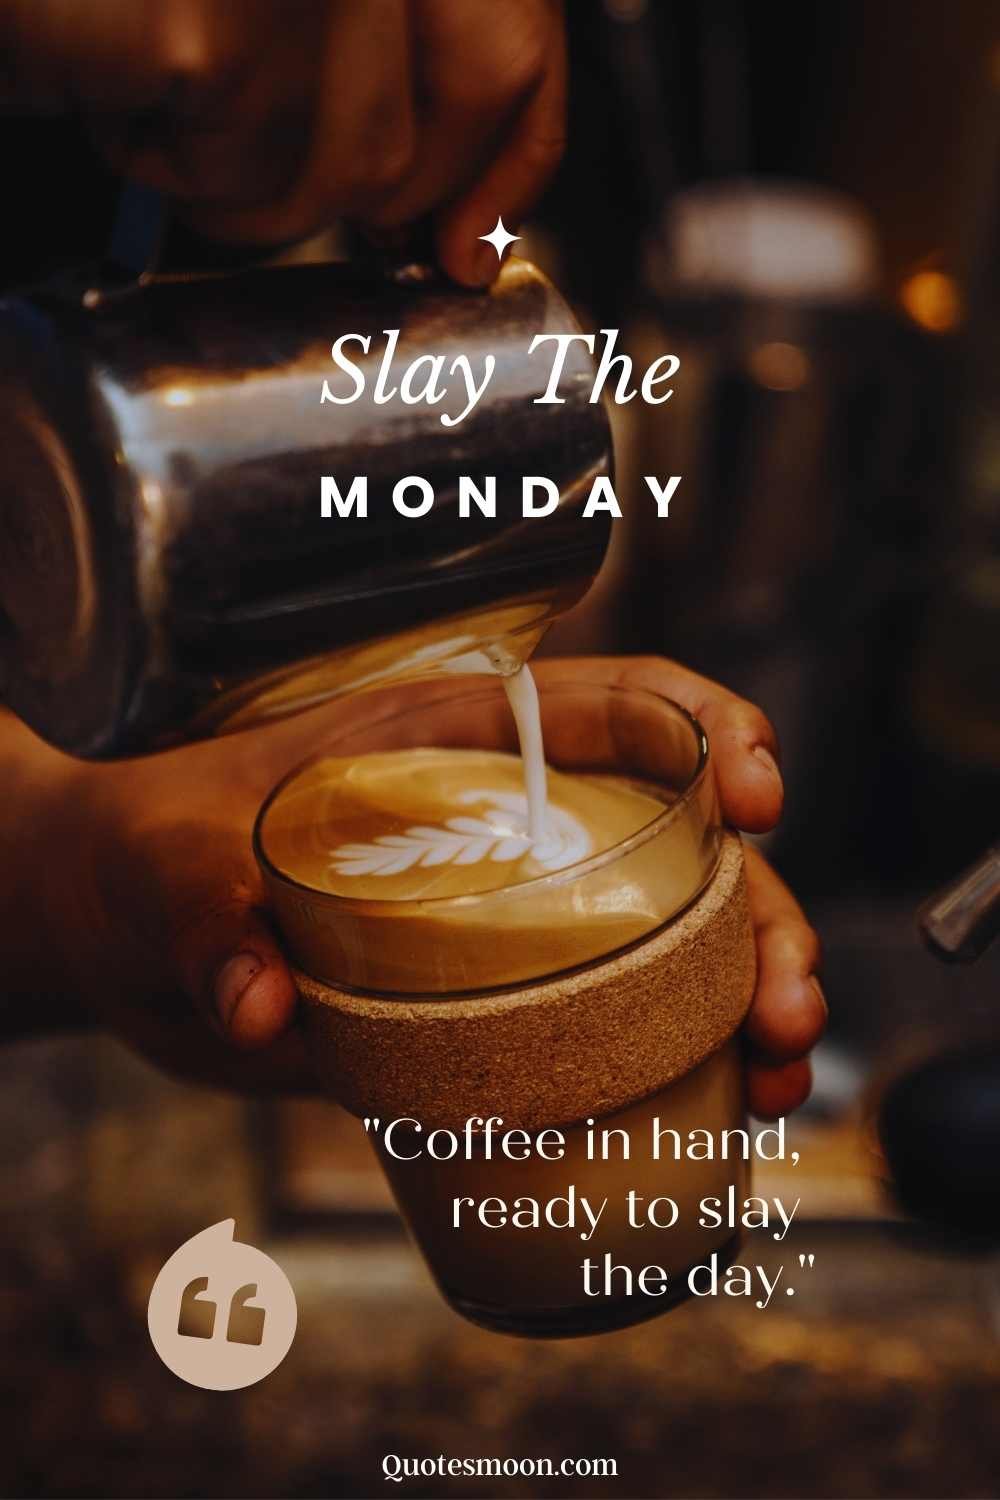 Inspirational Coffee Quotes to make you smile